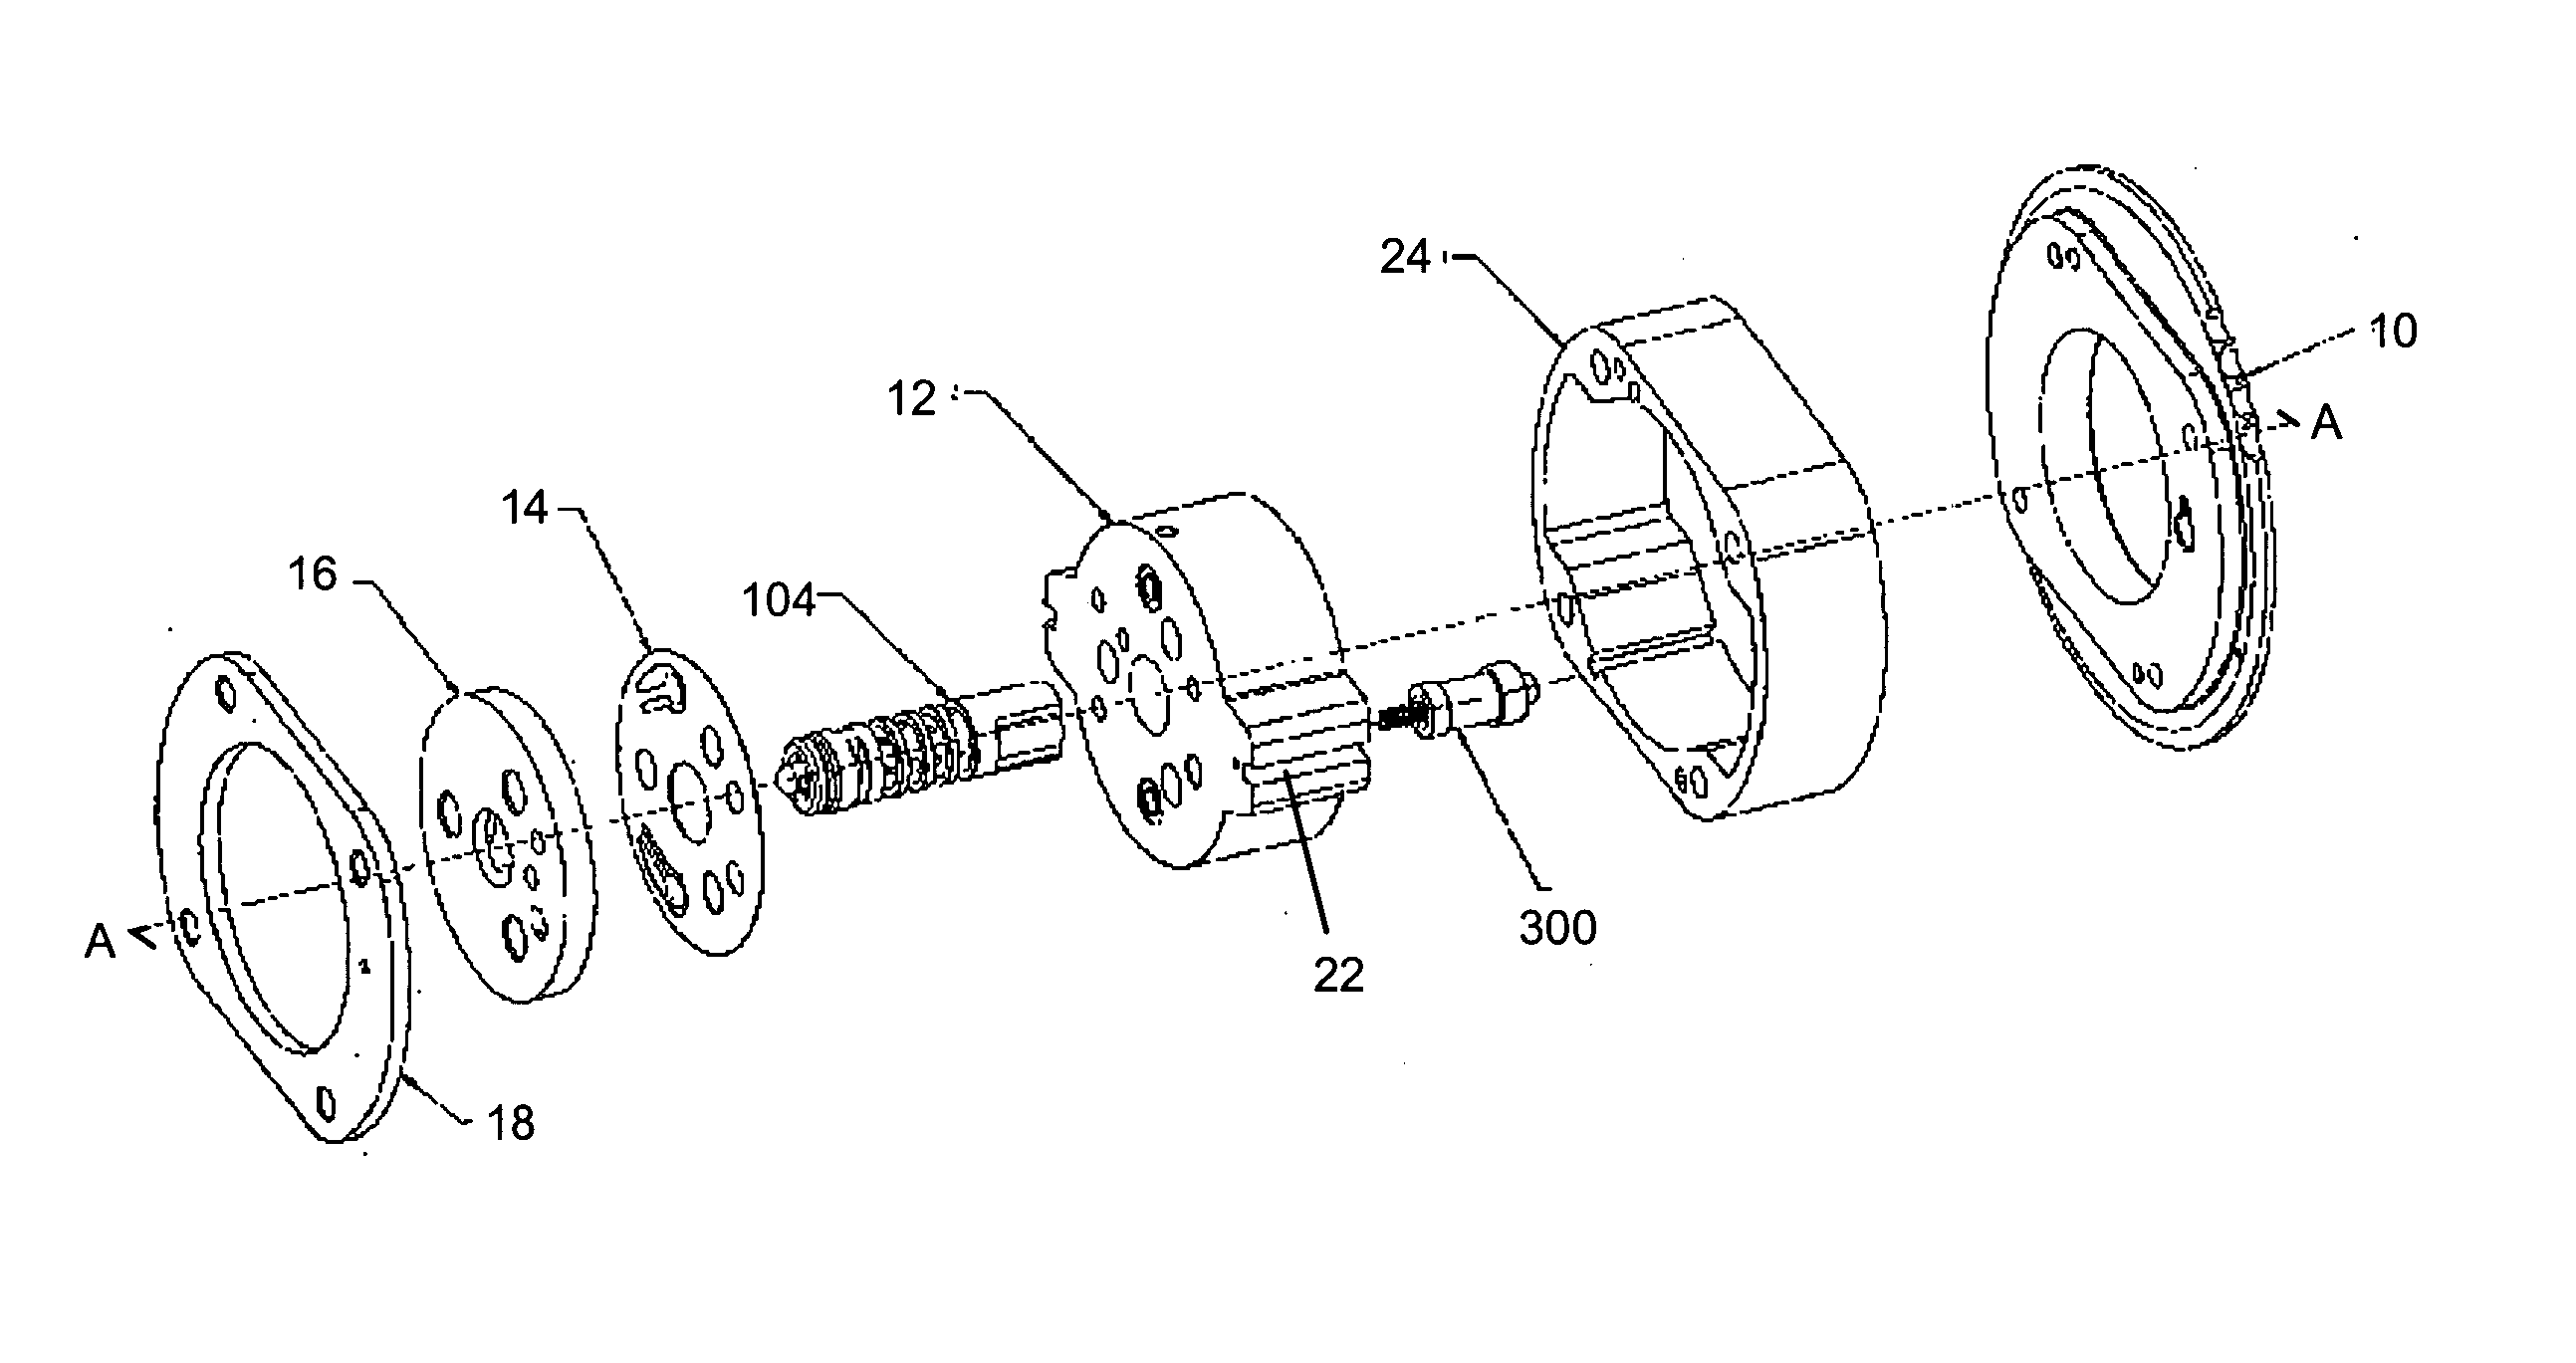 CTA phaser with proportional oil pressure for actuation at engine condition with low cam torsionals